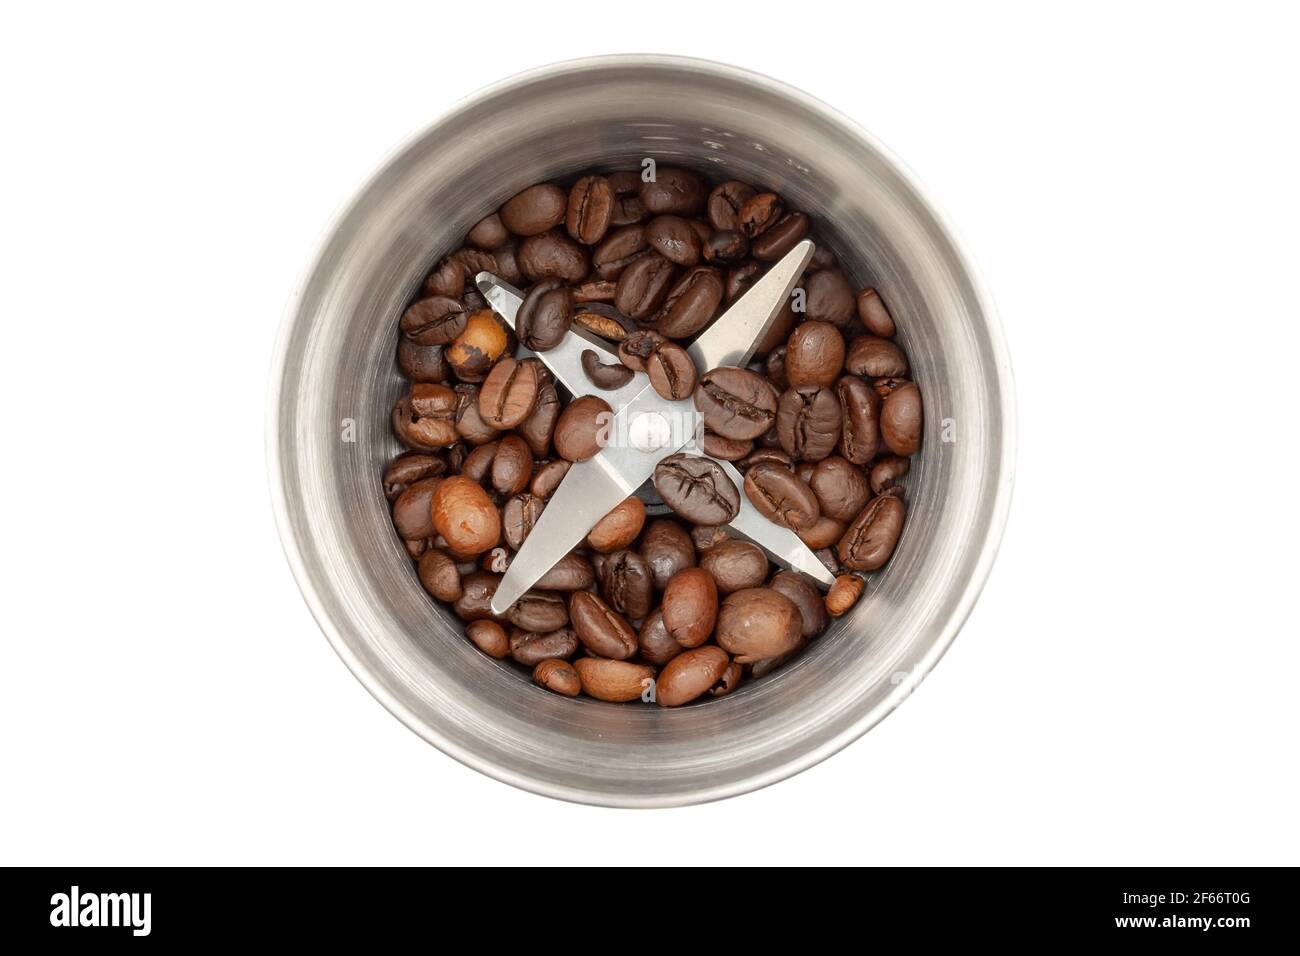 https://c8.alamy.com/comp/2F66T0G/steel-coffee-grinder-with-coffee-beans-isolated-on-white-background-blade-top-view-2F66T0G.jpg